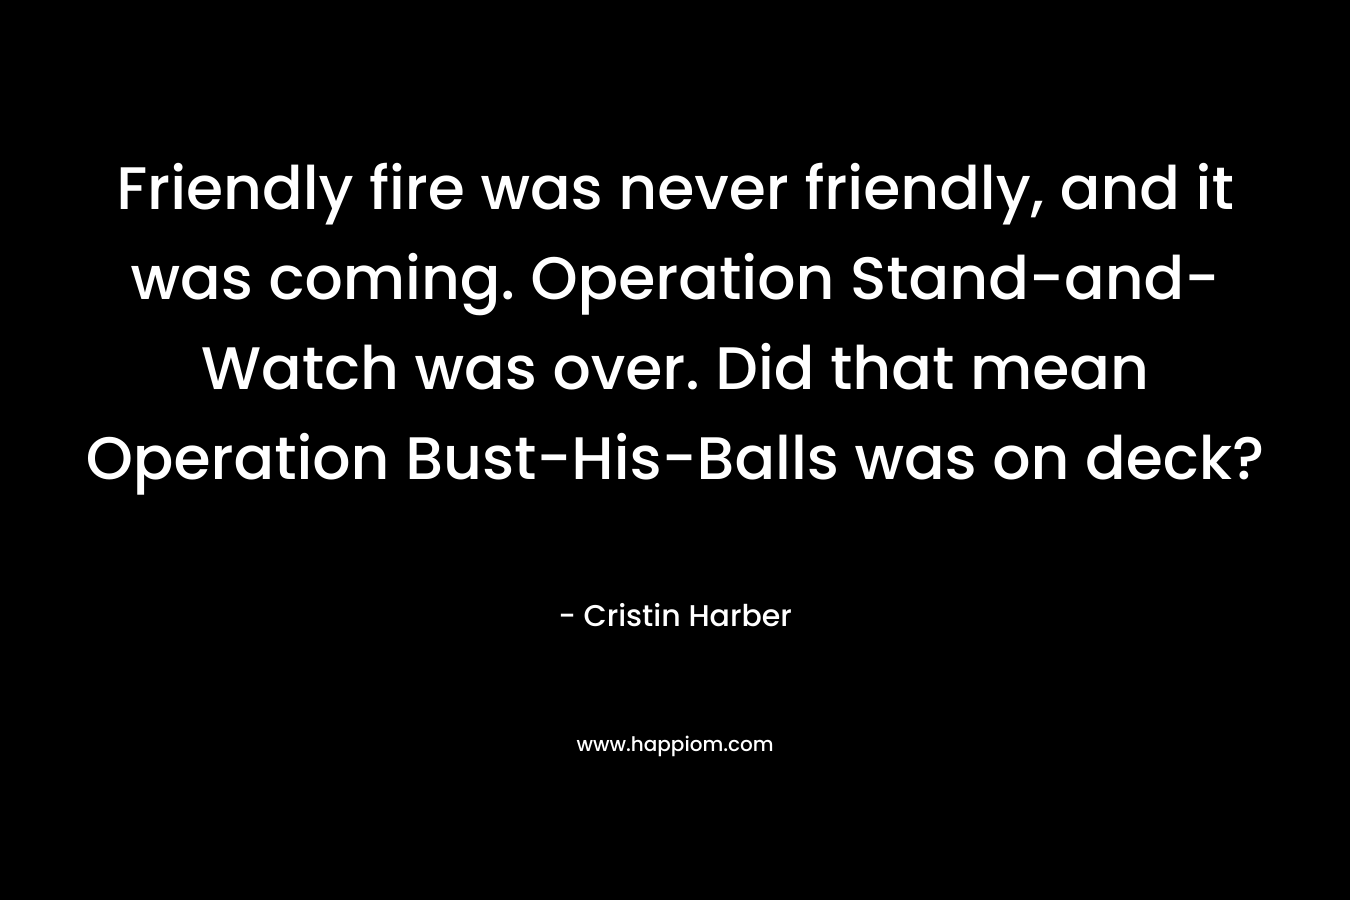 Friendly fire was never friendly, and it was coming. Operation Stand-and-Watch was over. Did that mean Operation Bust-His-Balls was on deck?